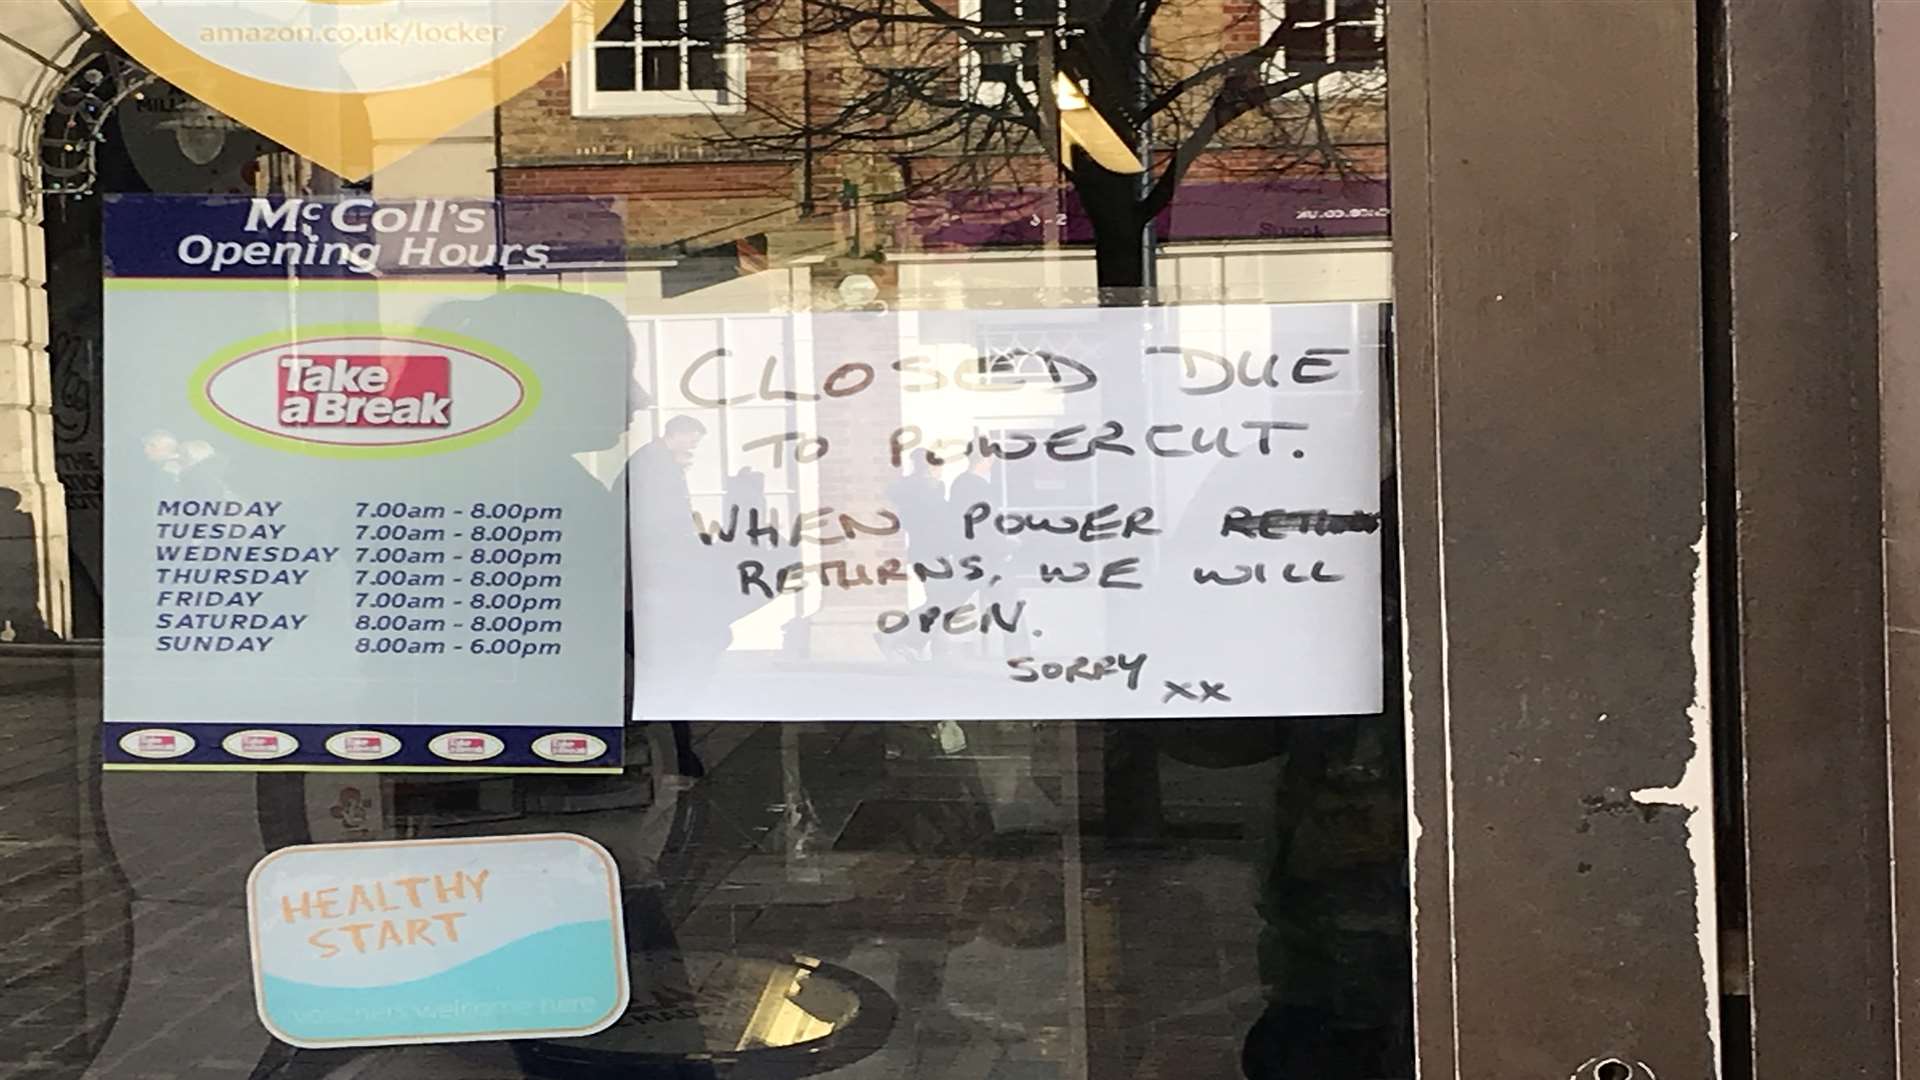 McColl's the newsagent is one of the business that has closed because of the power cut.